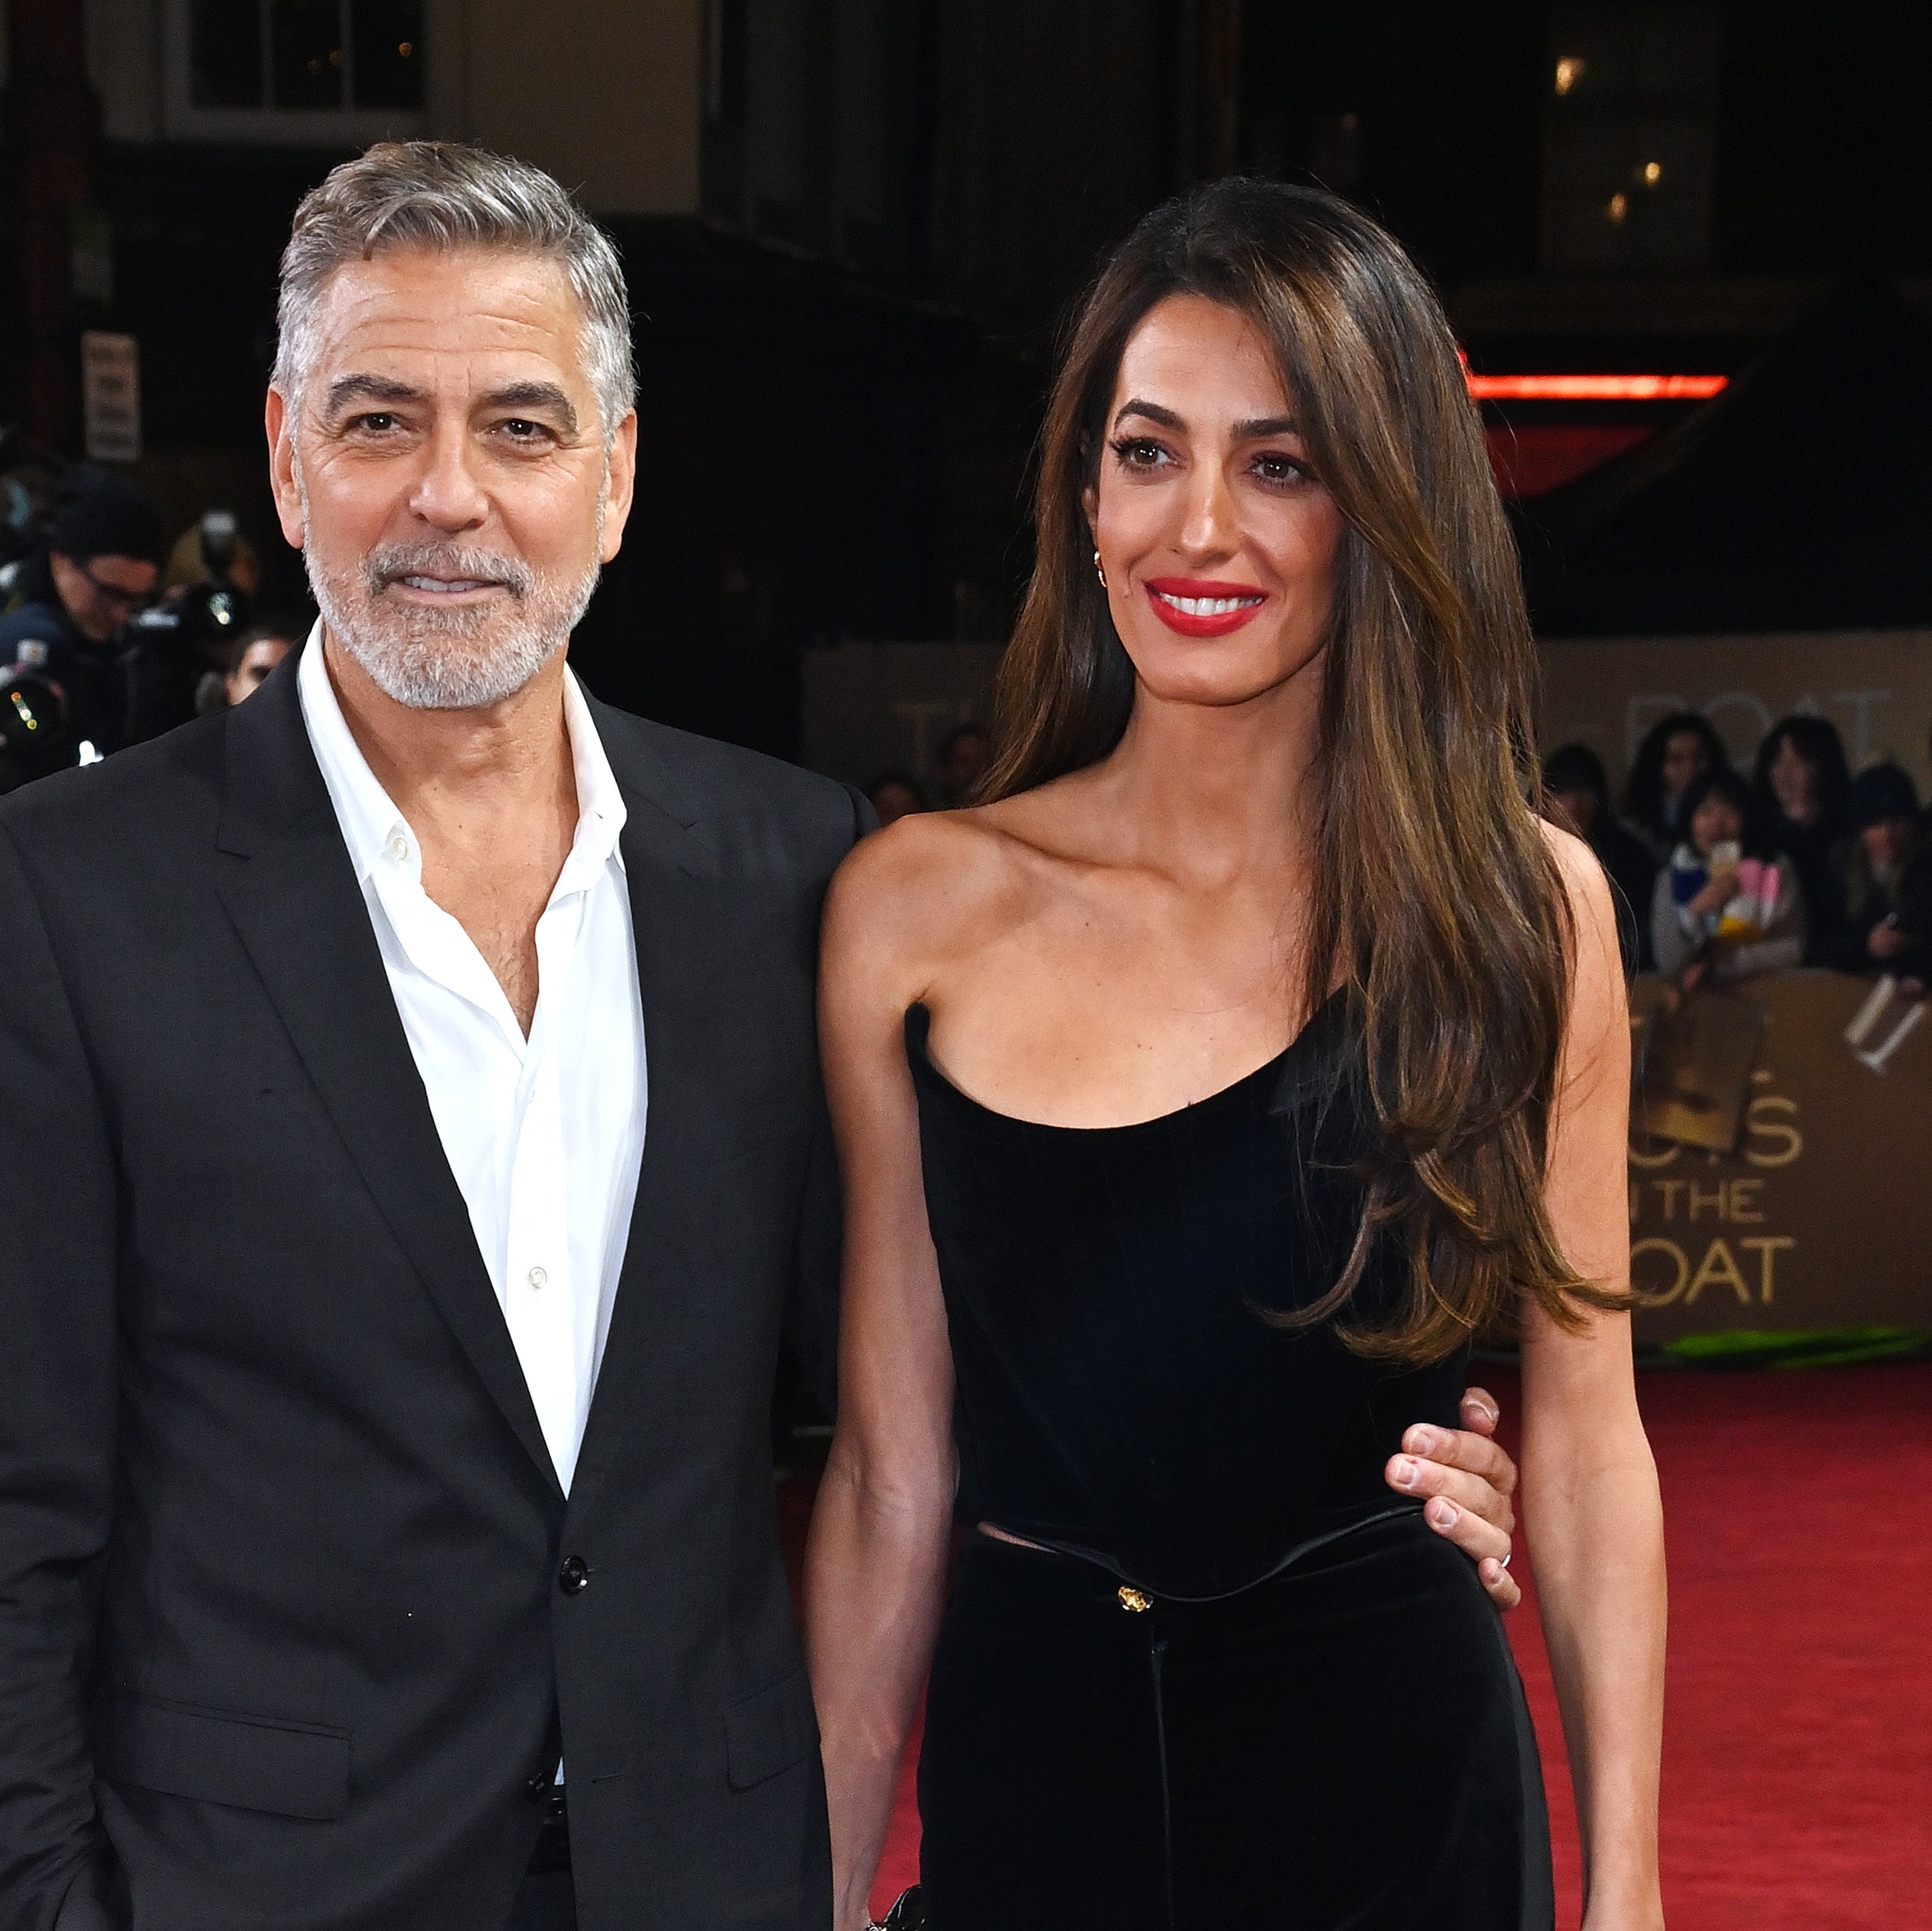 Two celebrities on the red carpet, with the male in a gray suit and the female in a sleek black dress